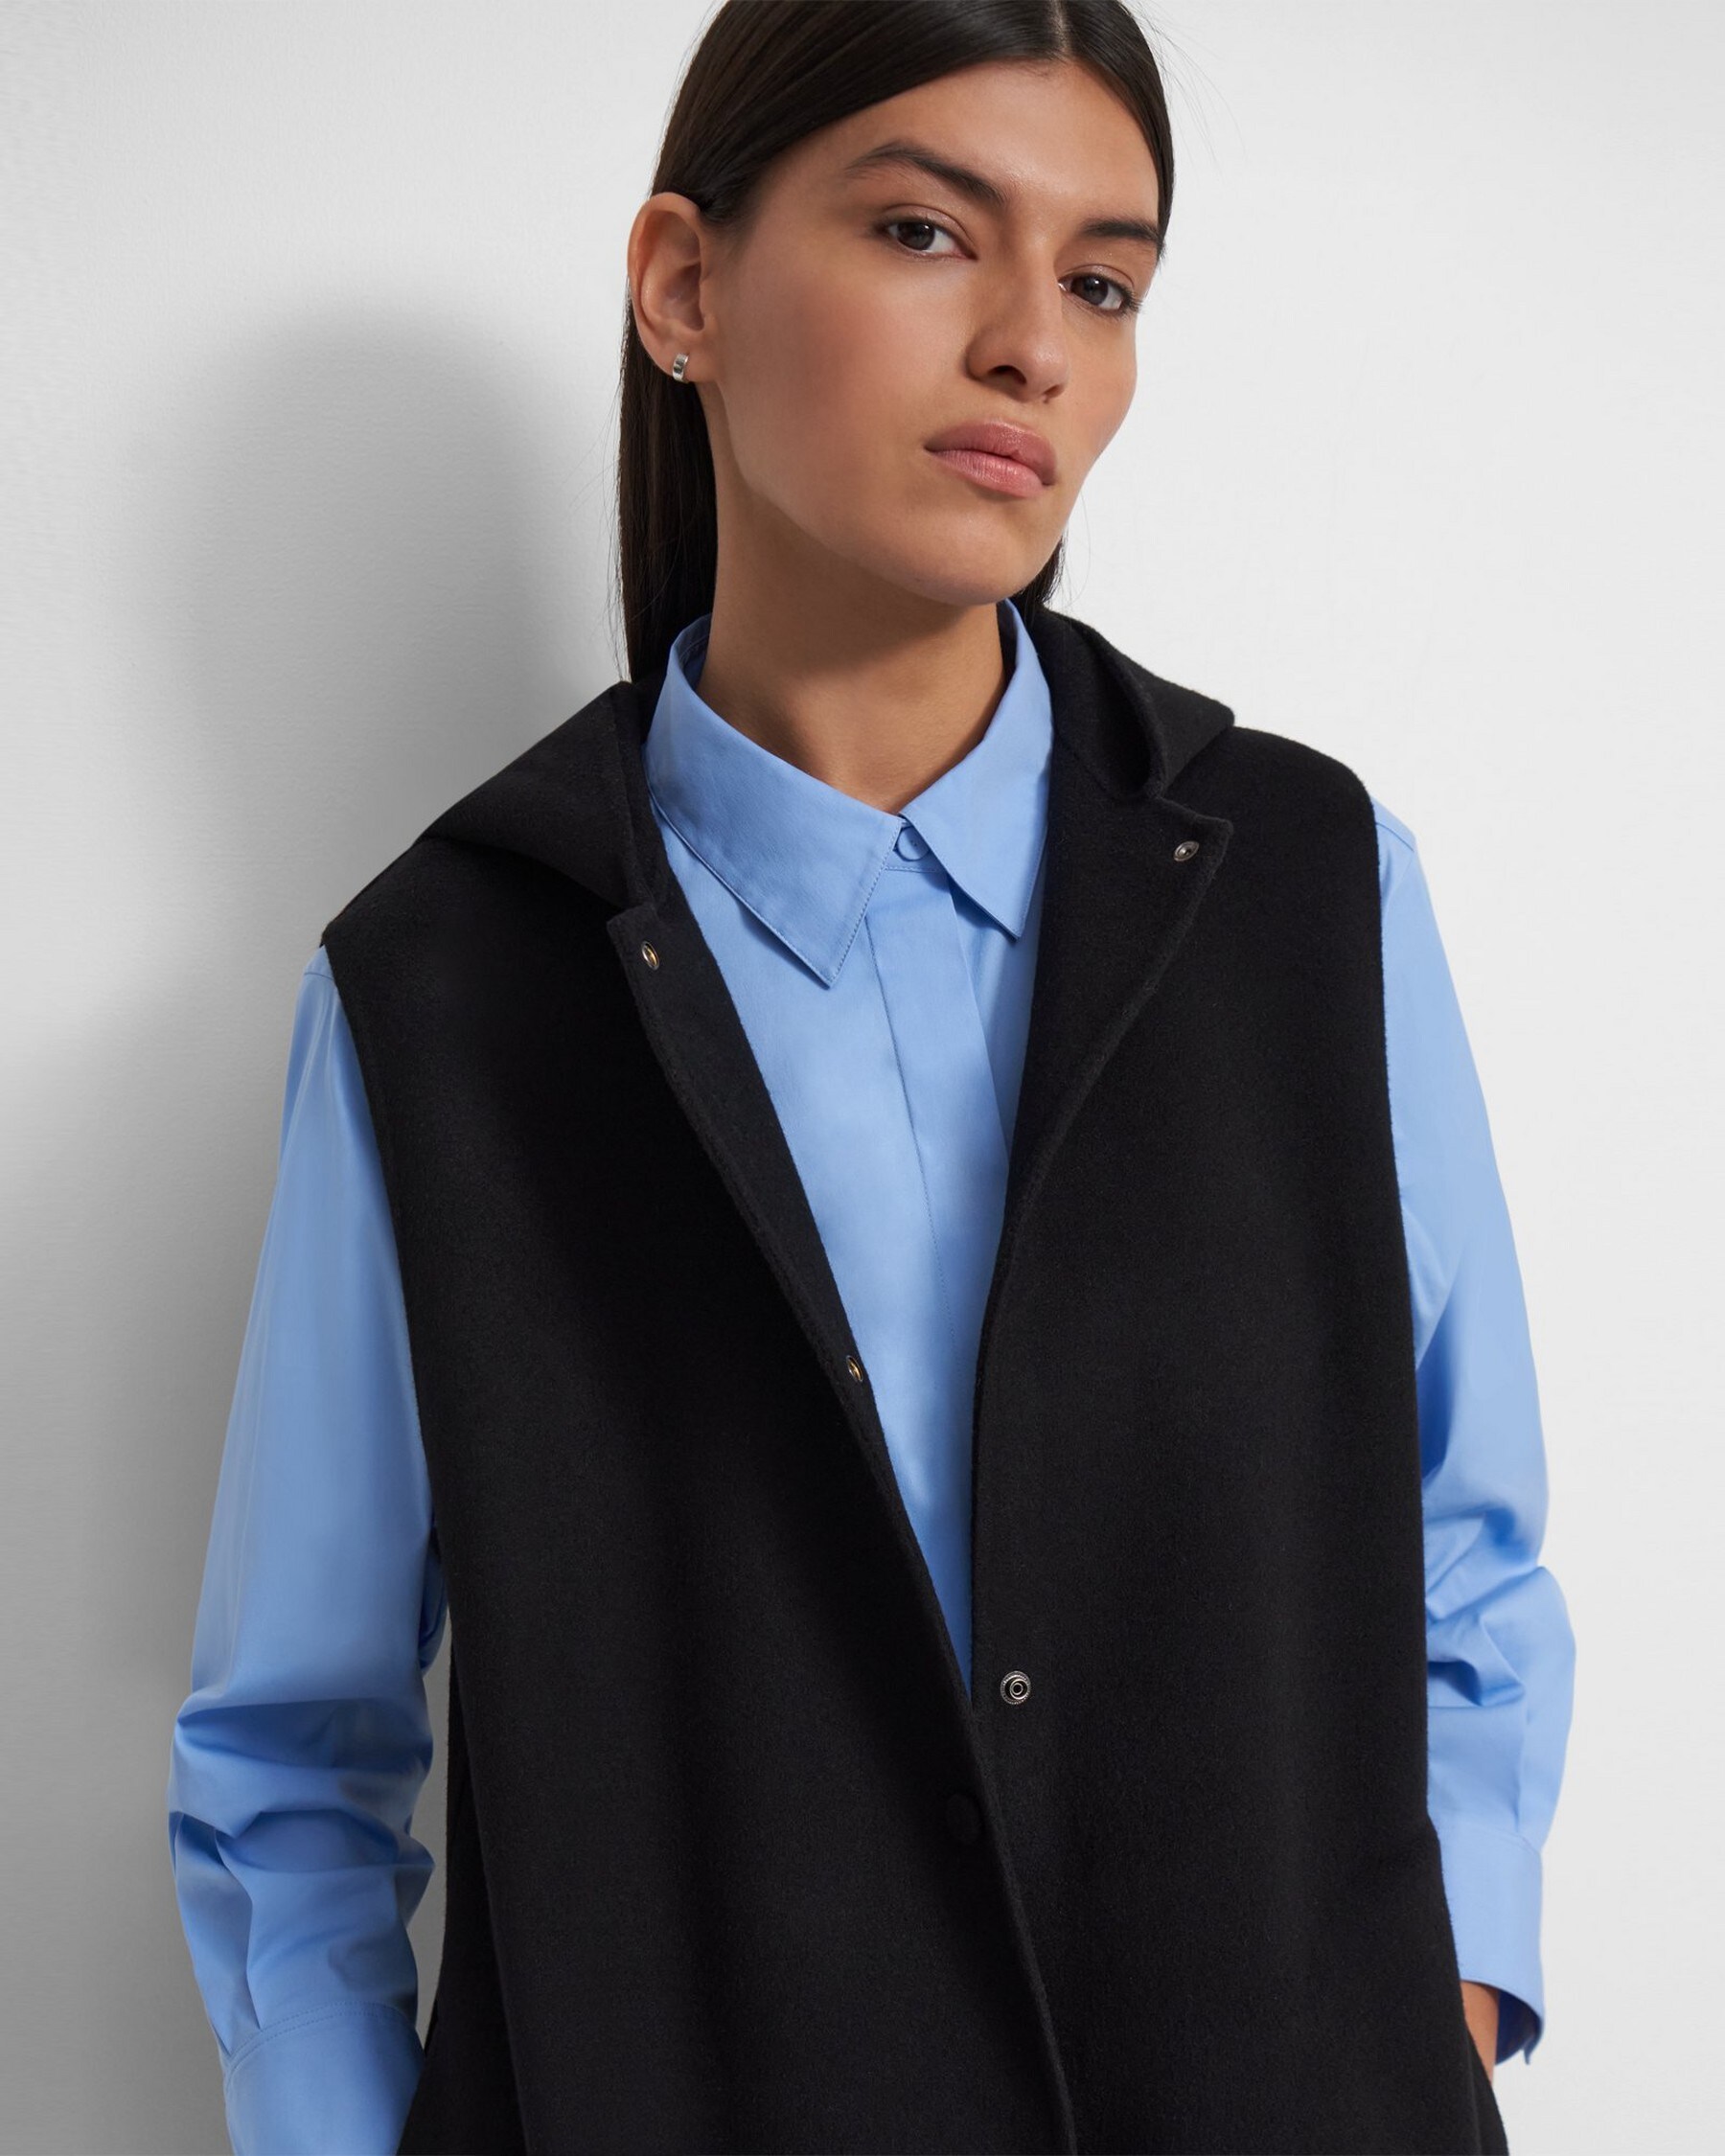 Clairene Vest in Double-Face Wool-Cashmere